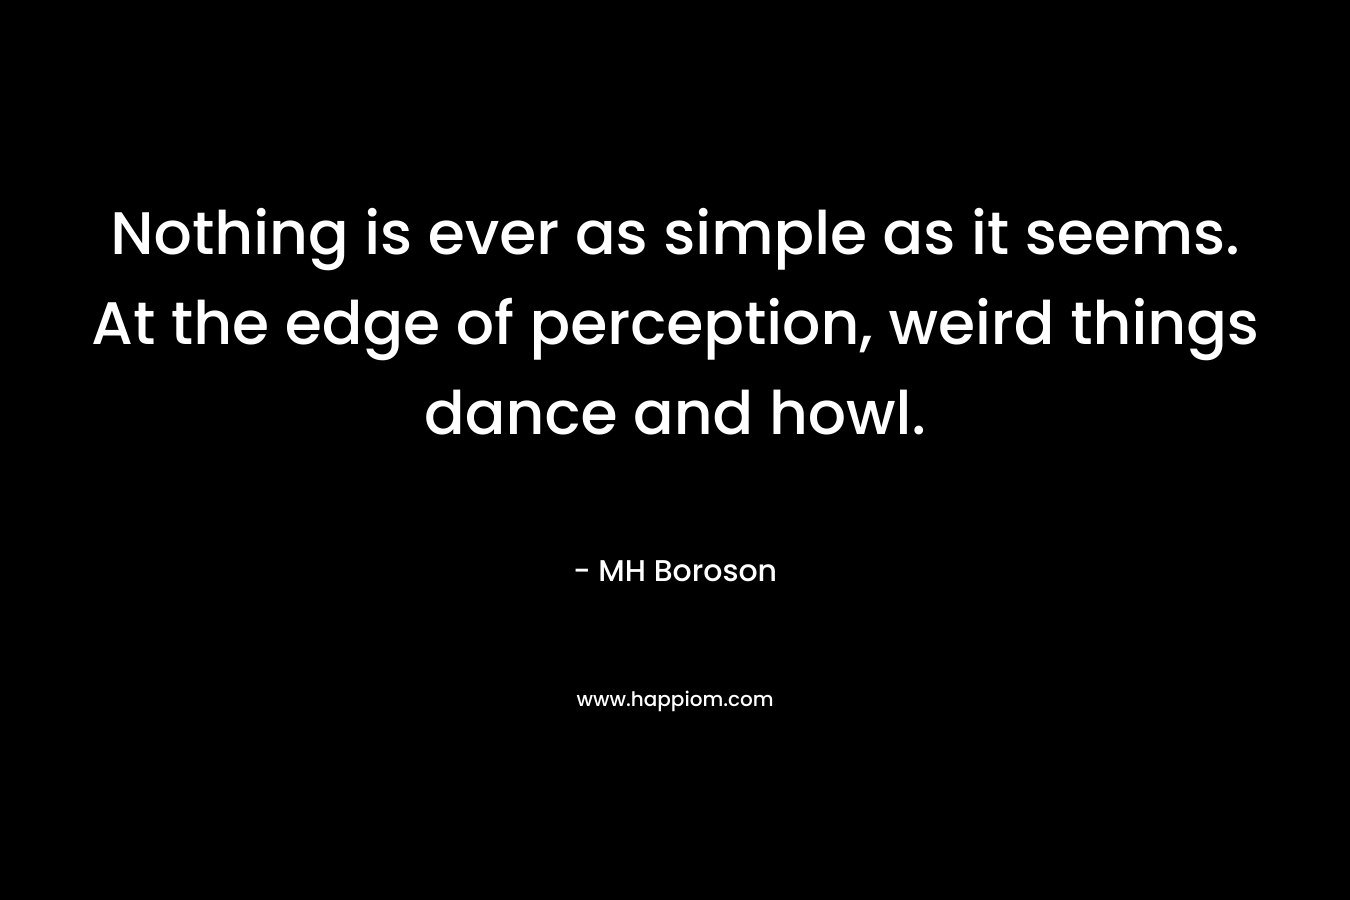 Nothing is ever as simple as it seems. At the edge of perception, weird things dance and howl. – MH Boroson